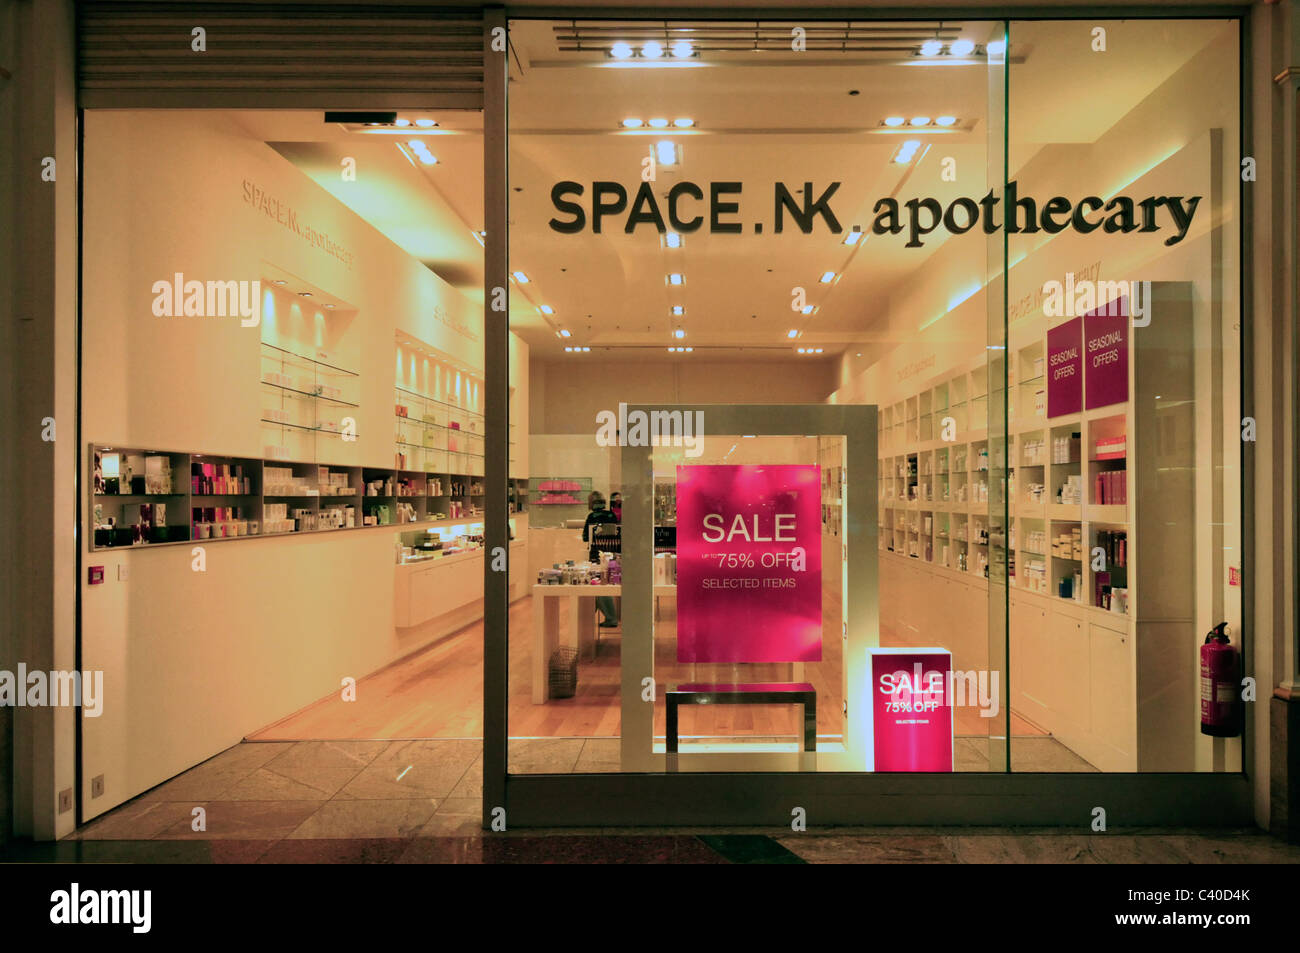 Space nk apothecary Banque D'Images